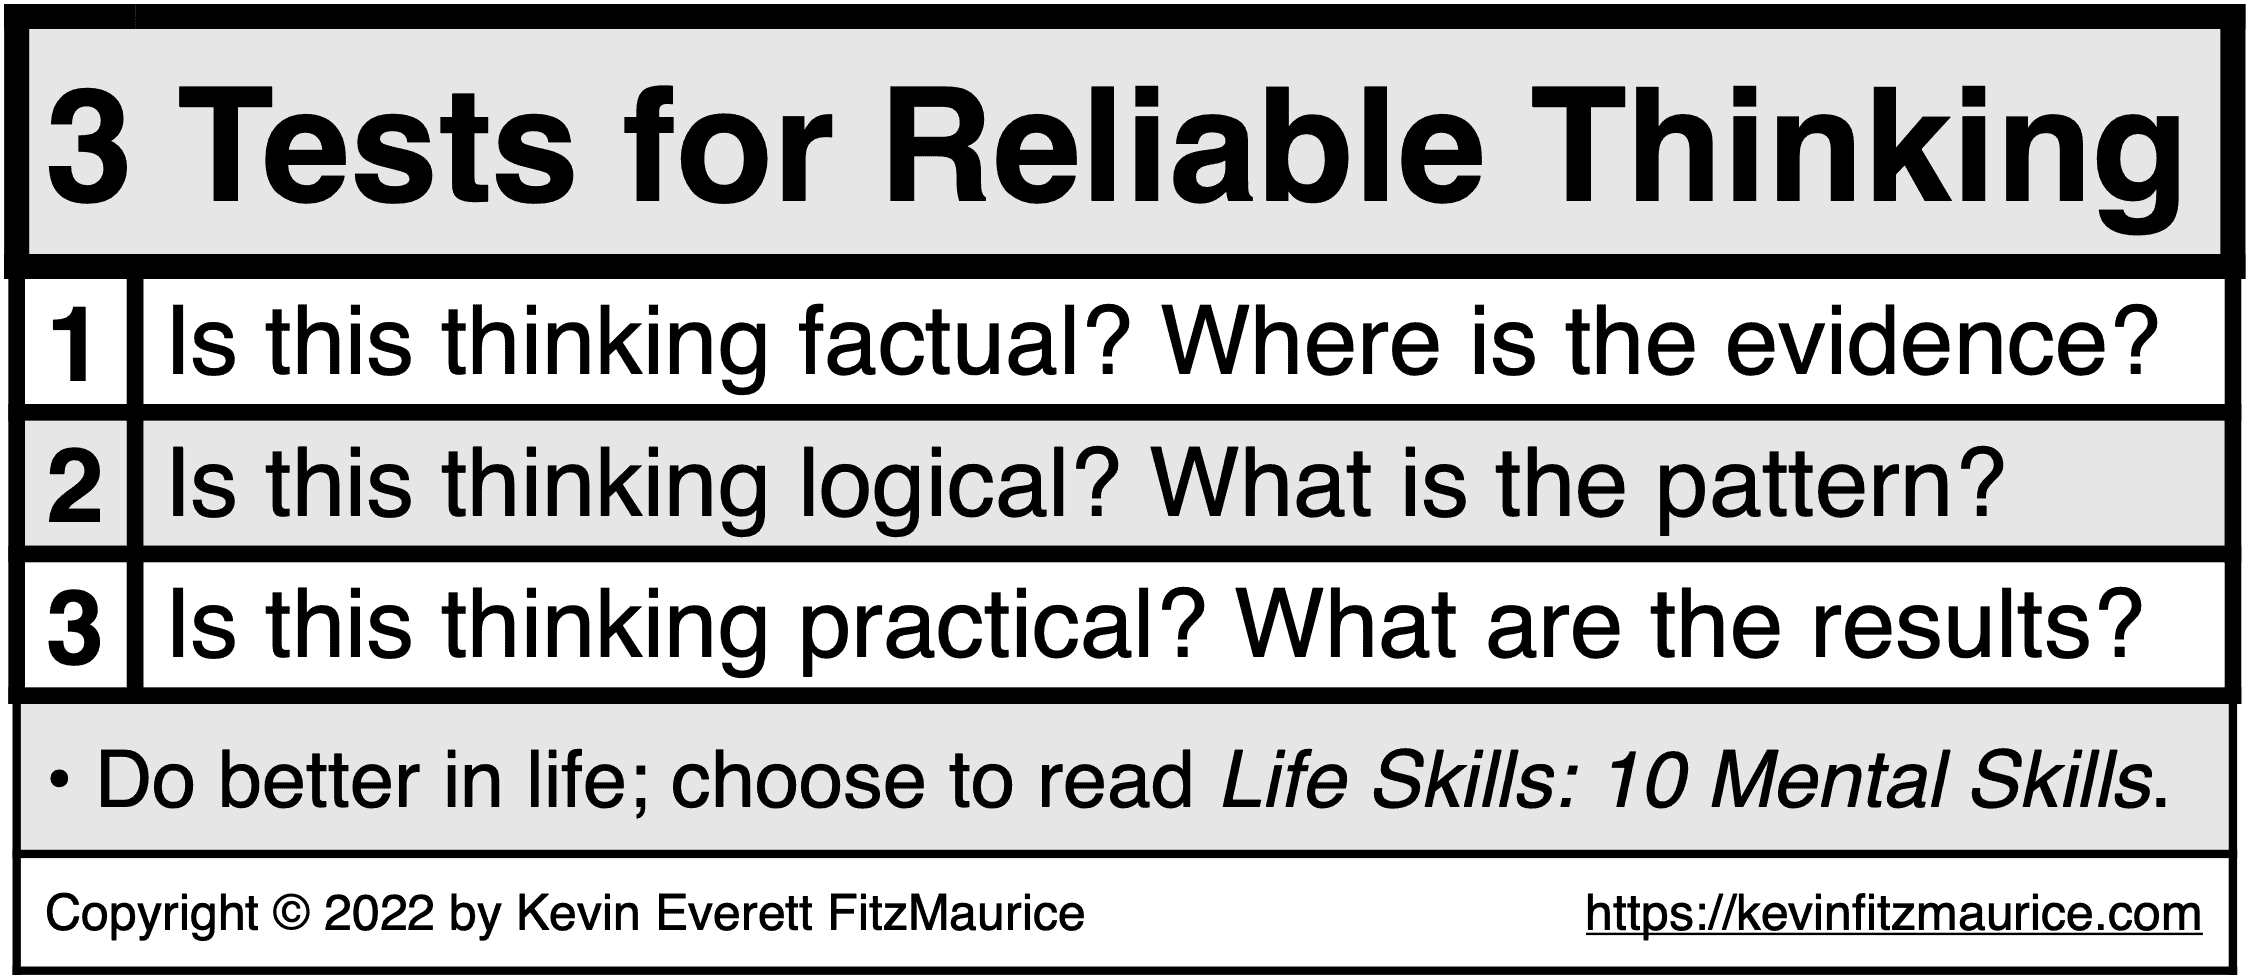 3 Tests for Reliable Thinking